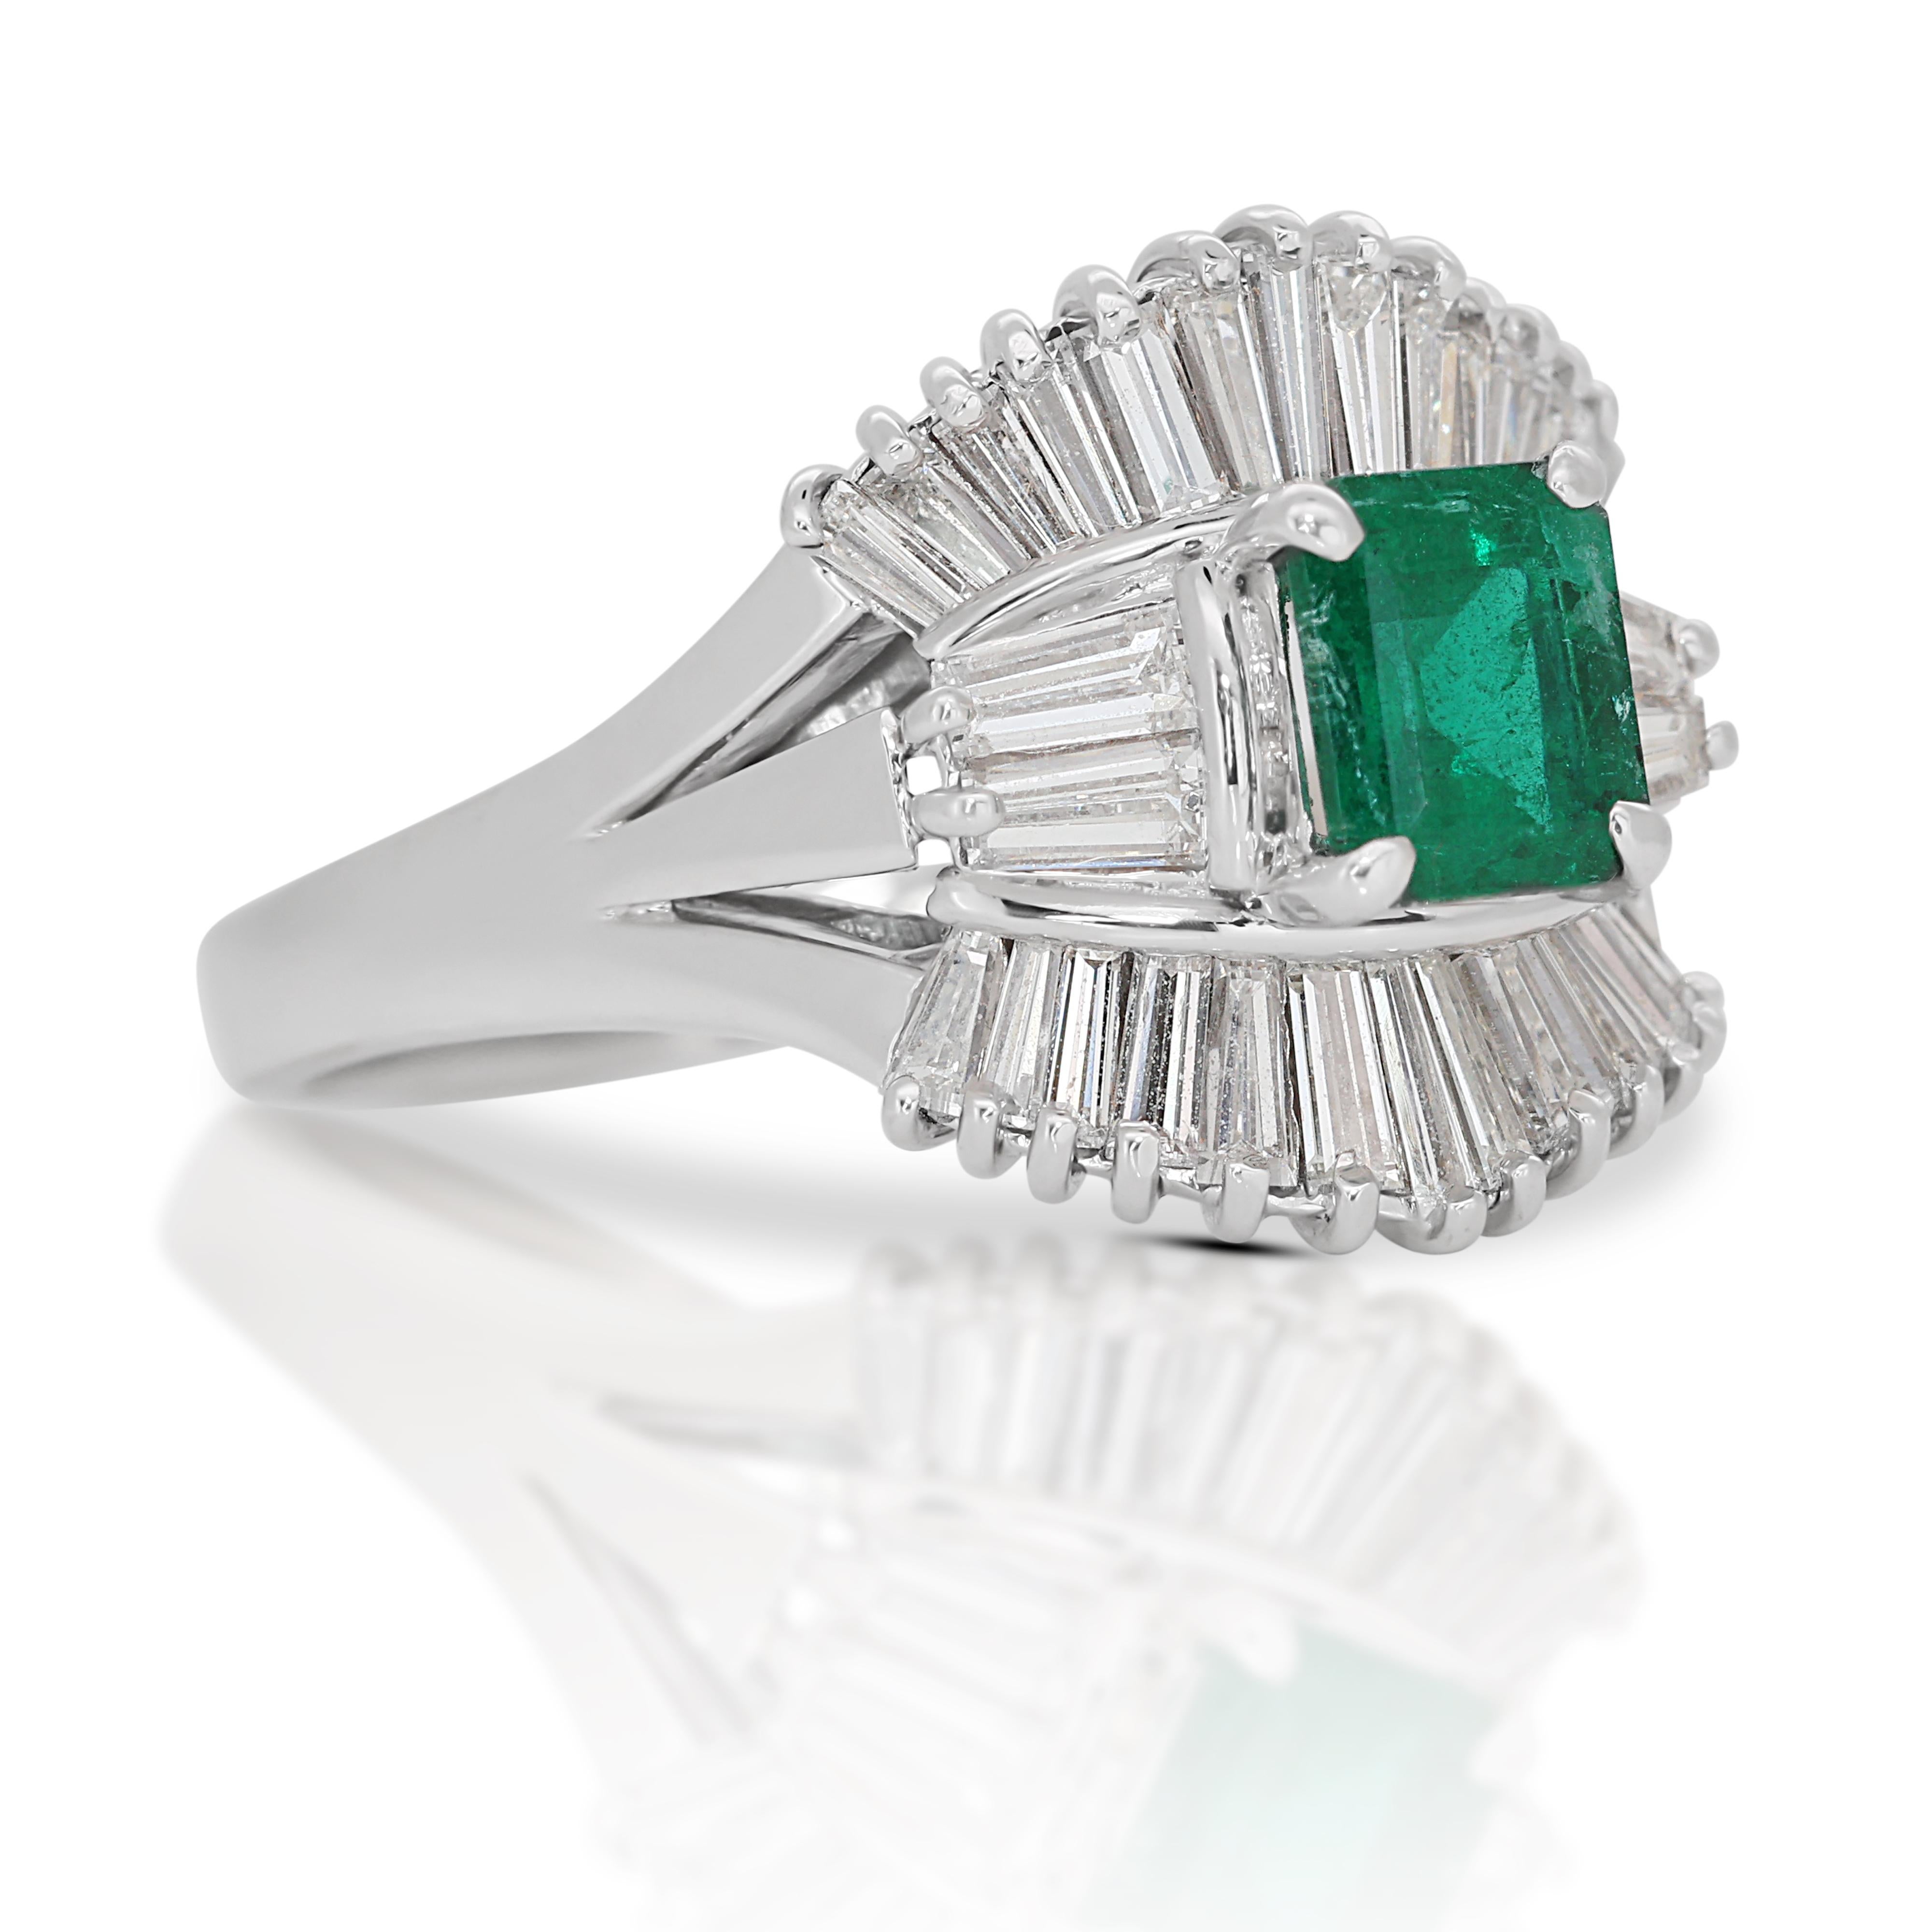 Emerald Cut Stunning 2.08ct Emerald and Diamonds Halo Ring in 18k White Gold - IGI Certified For Sale